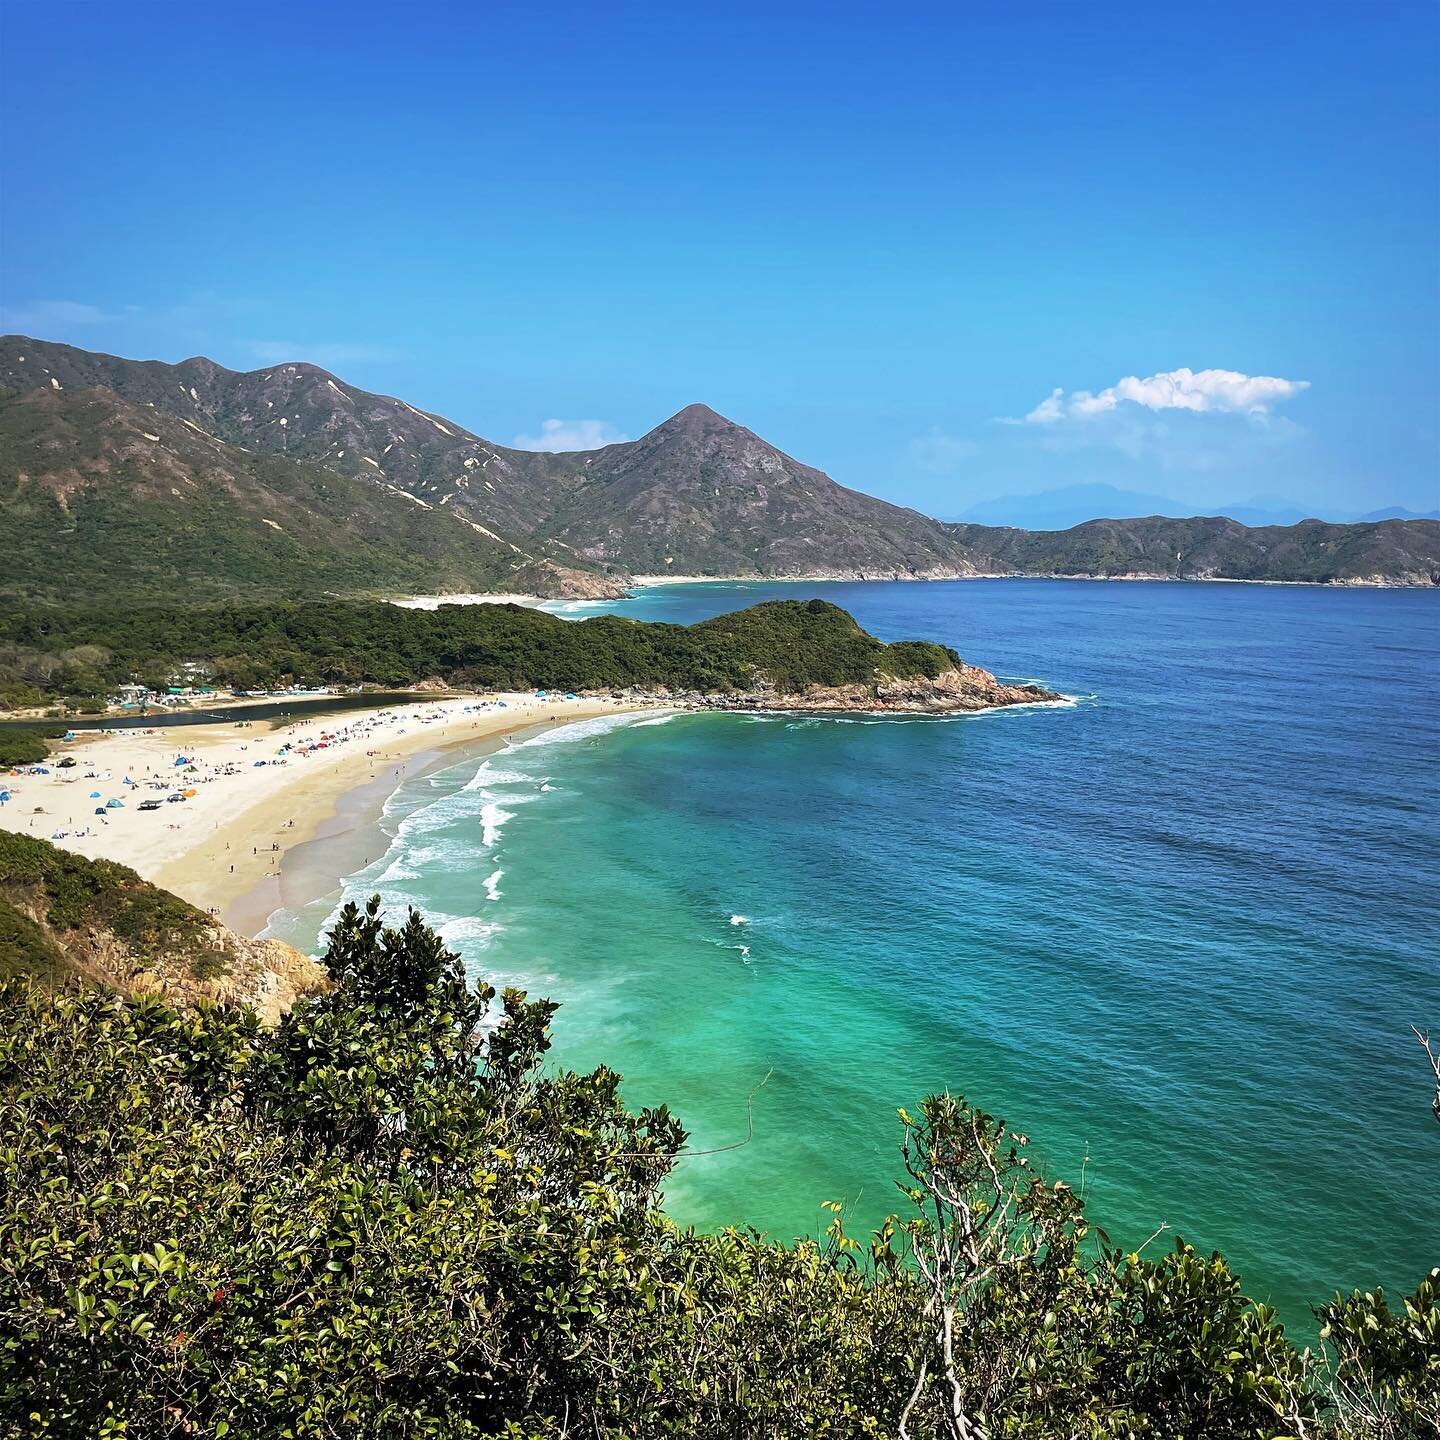 We can&rsquo;t jump into a plane to go to Phuket, but we can still enjoy Hong Kong&rsquo;s gems.
Today: Tai Long Wan, not bad to start the new year! #beyondthelinecoaching #swimeverywhereyoucan